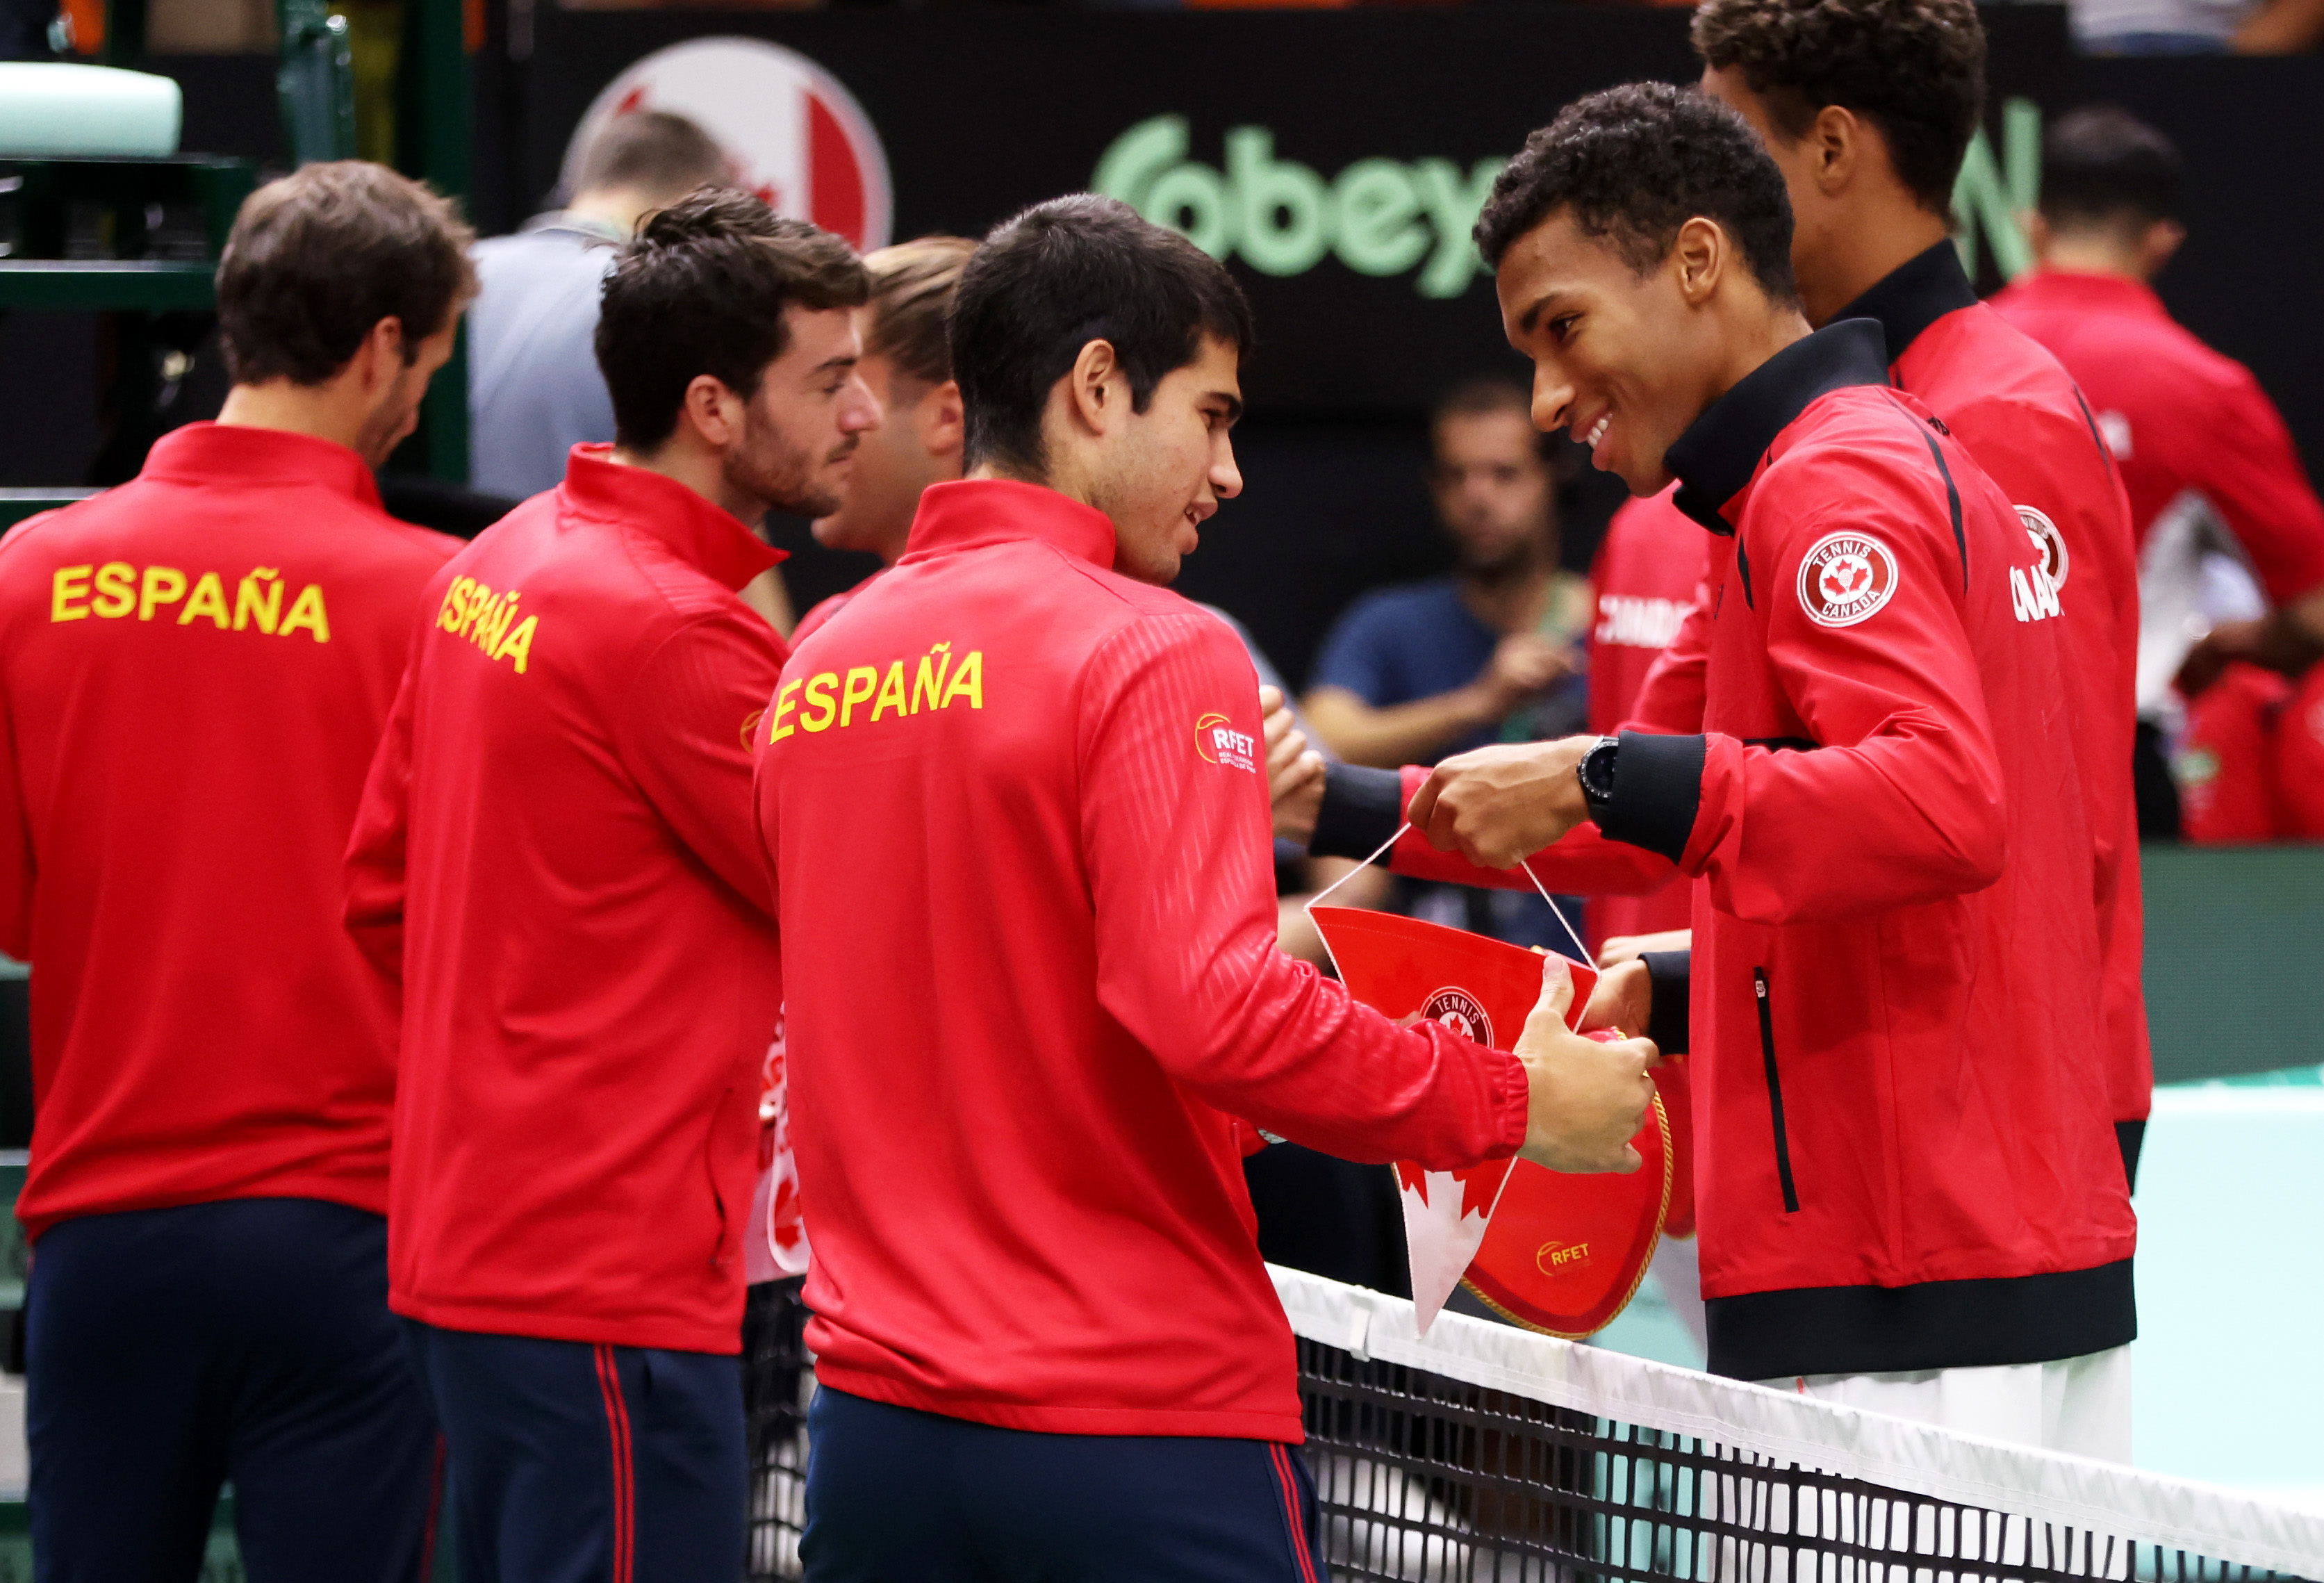 Davis Cup becomes official part of 2023 ATP calendar in